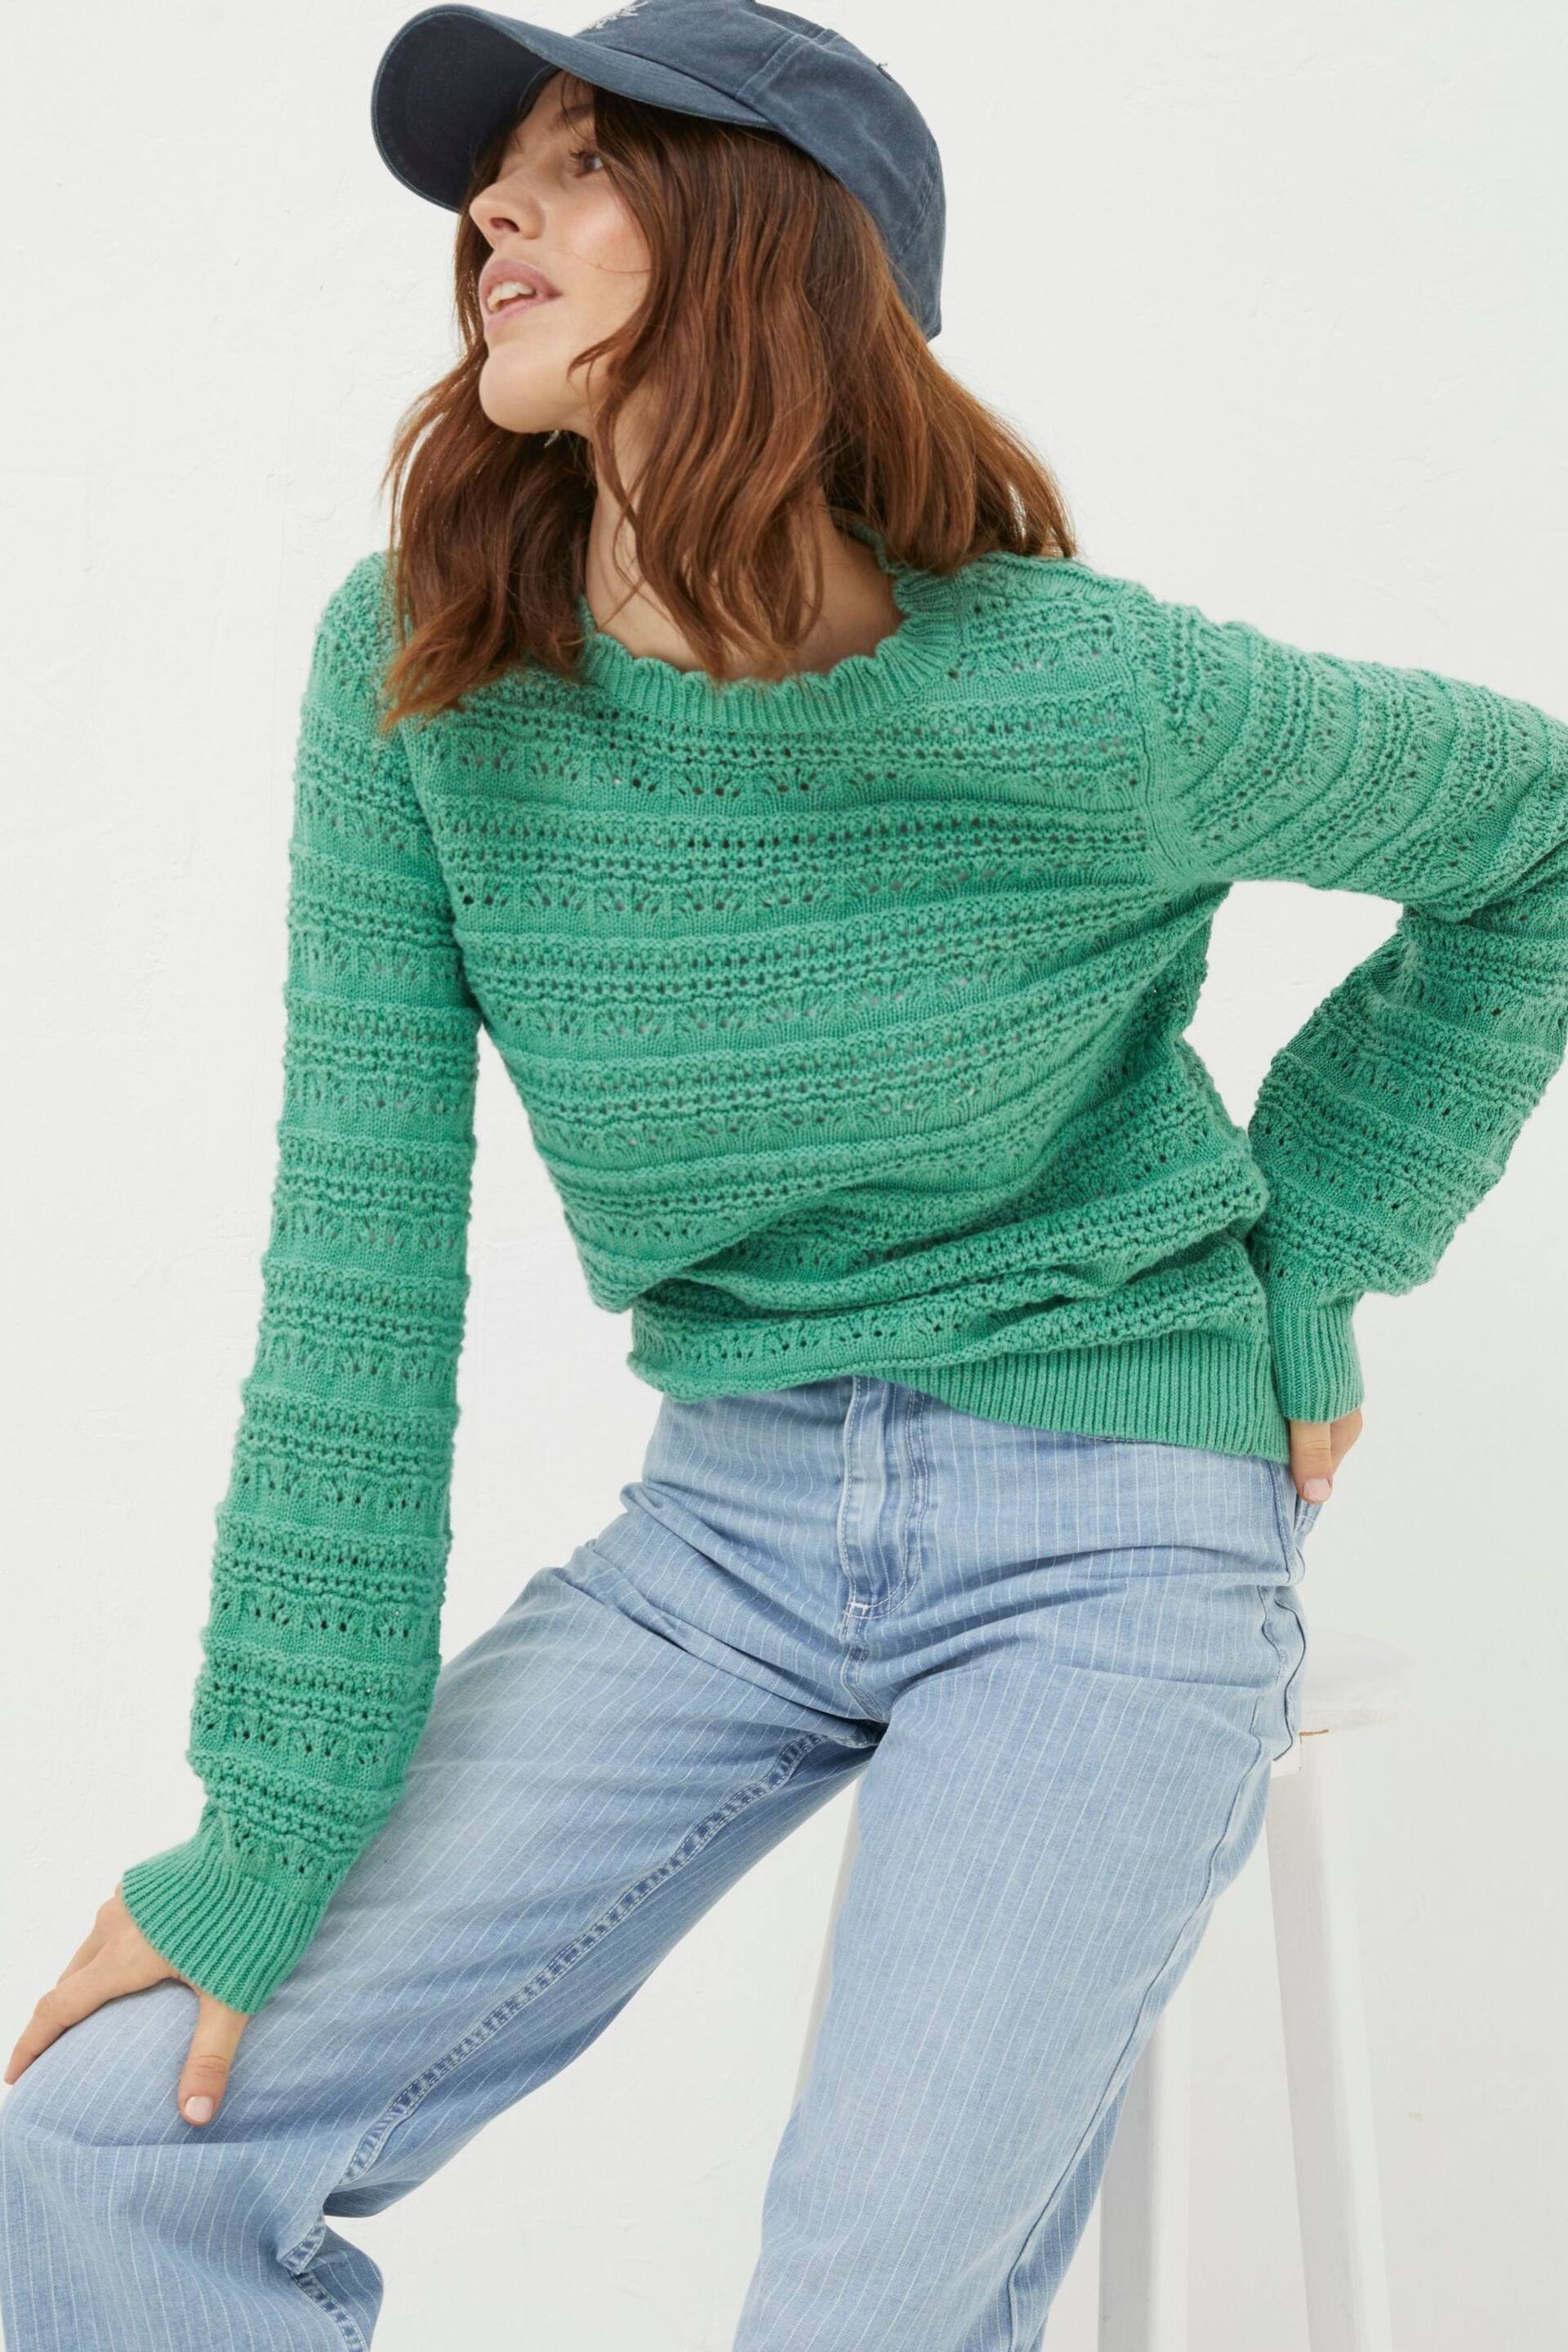 FatFace Green Adrinenna Crew Jumper - Image 3 of 5